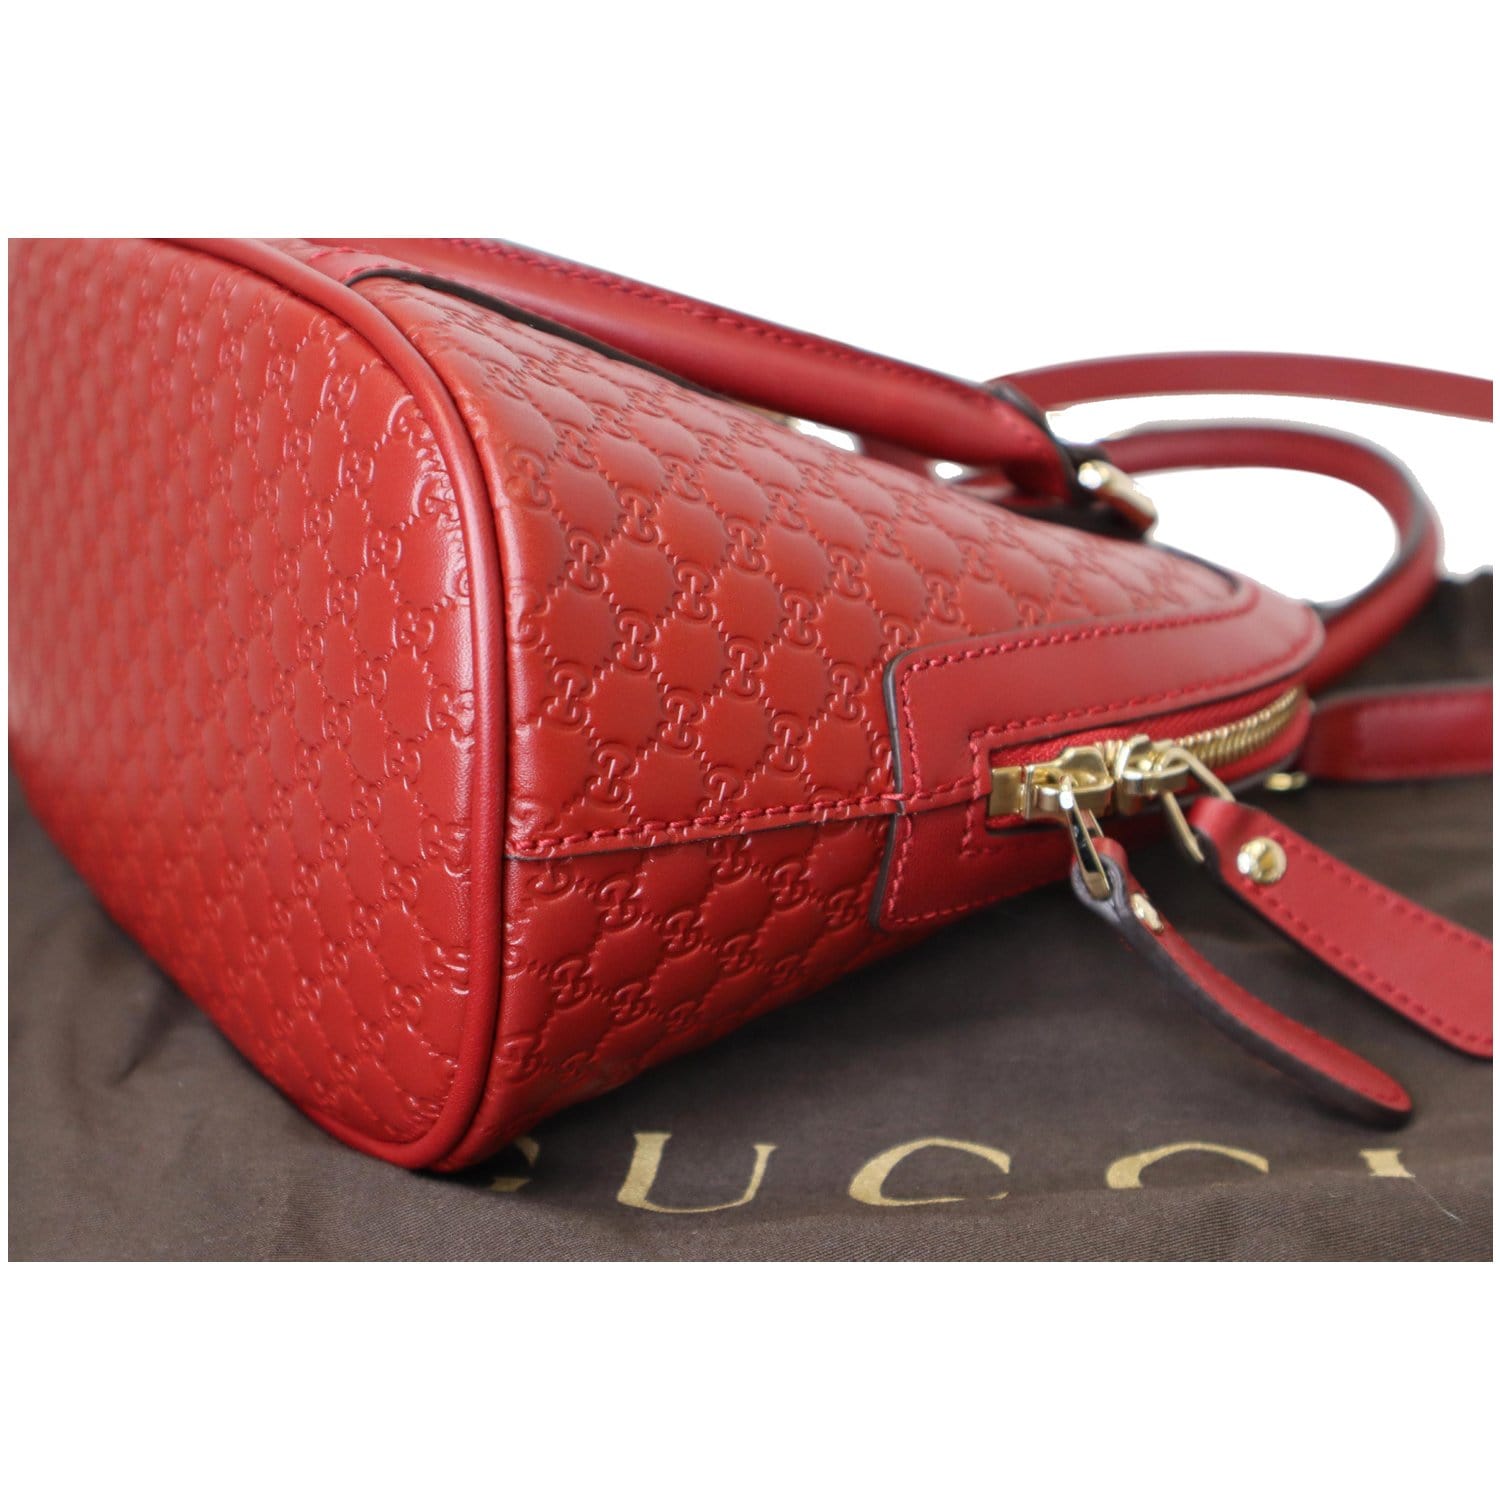 SOLD💕 Gucci Microguccissima Red Dome Two Way Bag. Made in Italy. With long  strap, swatch, card & dustbag ❤️